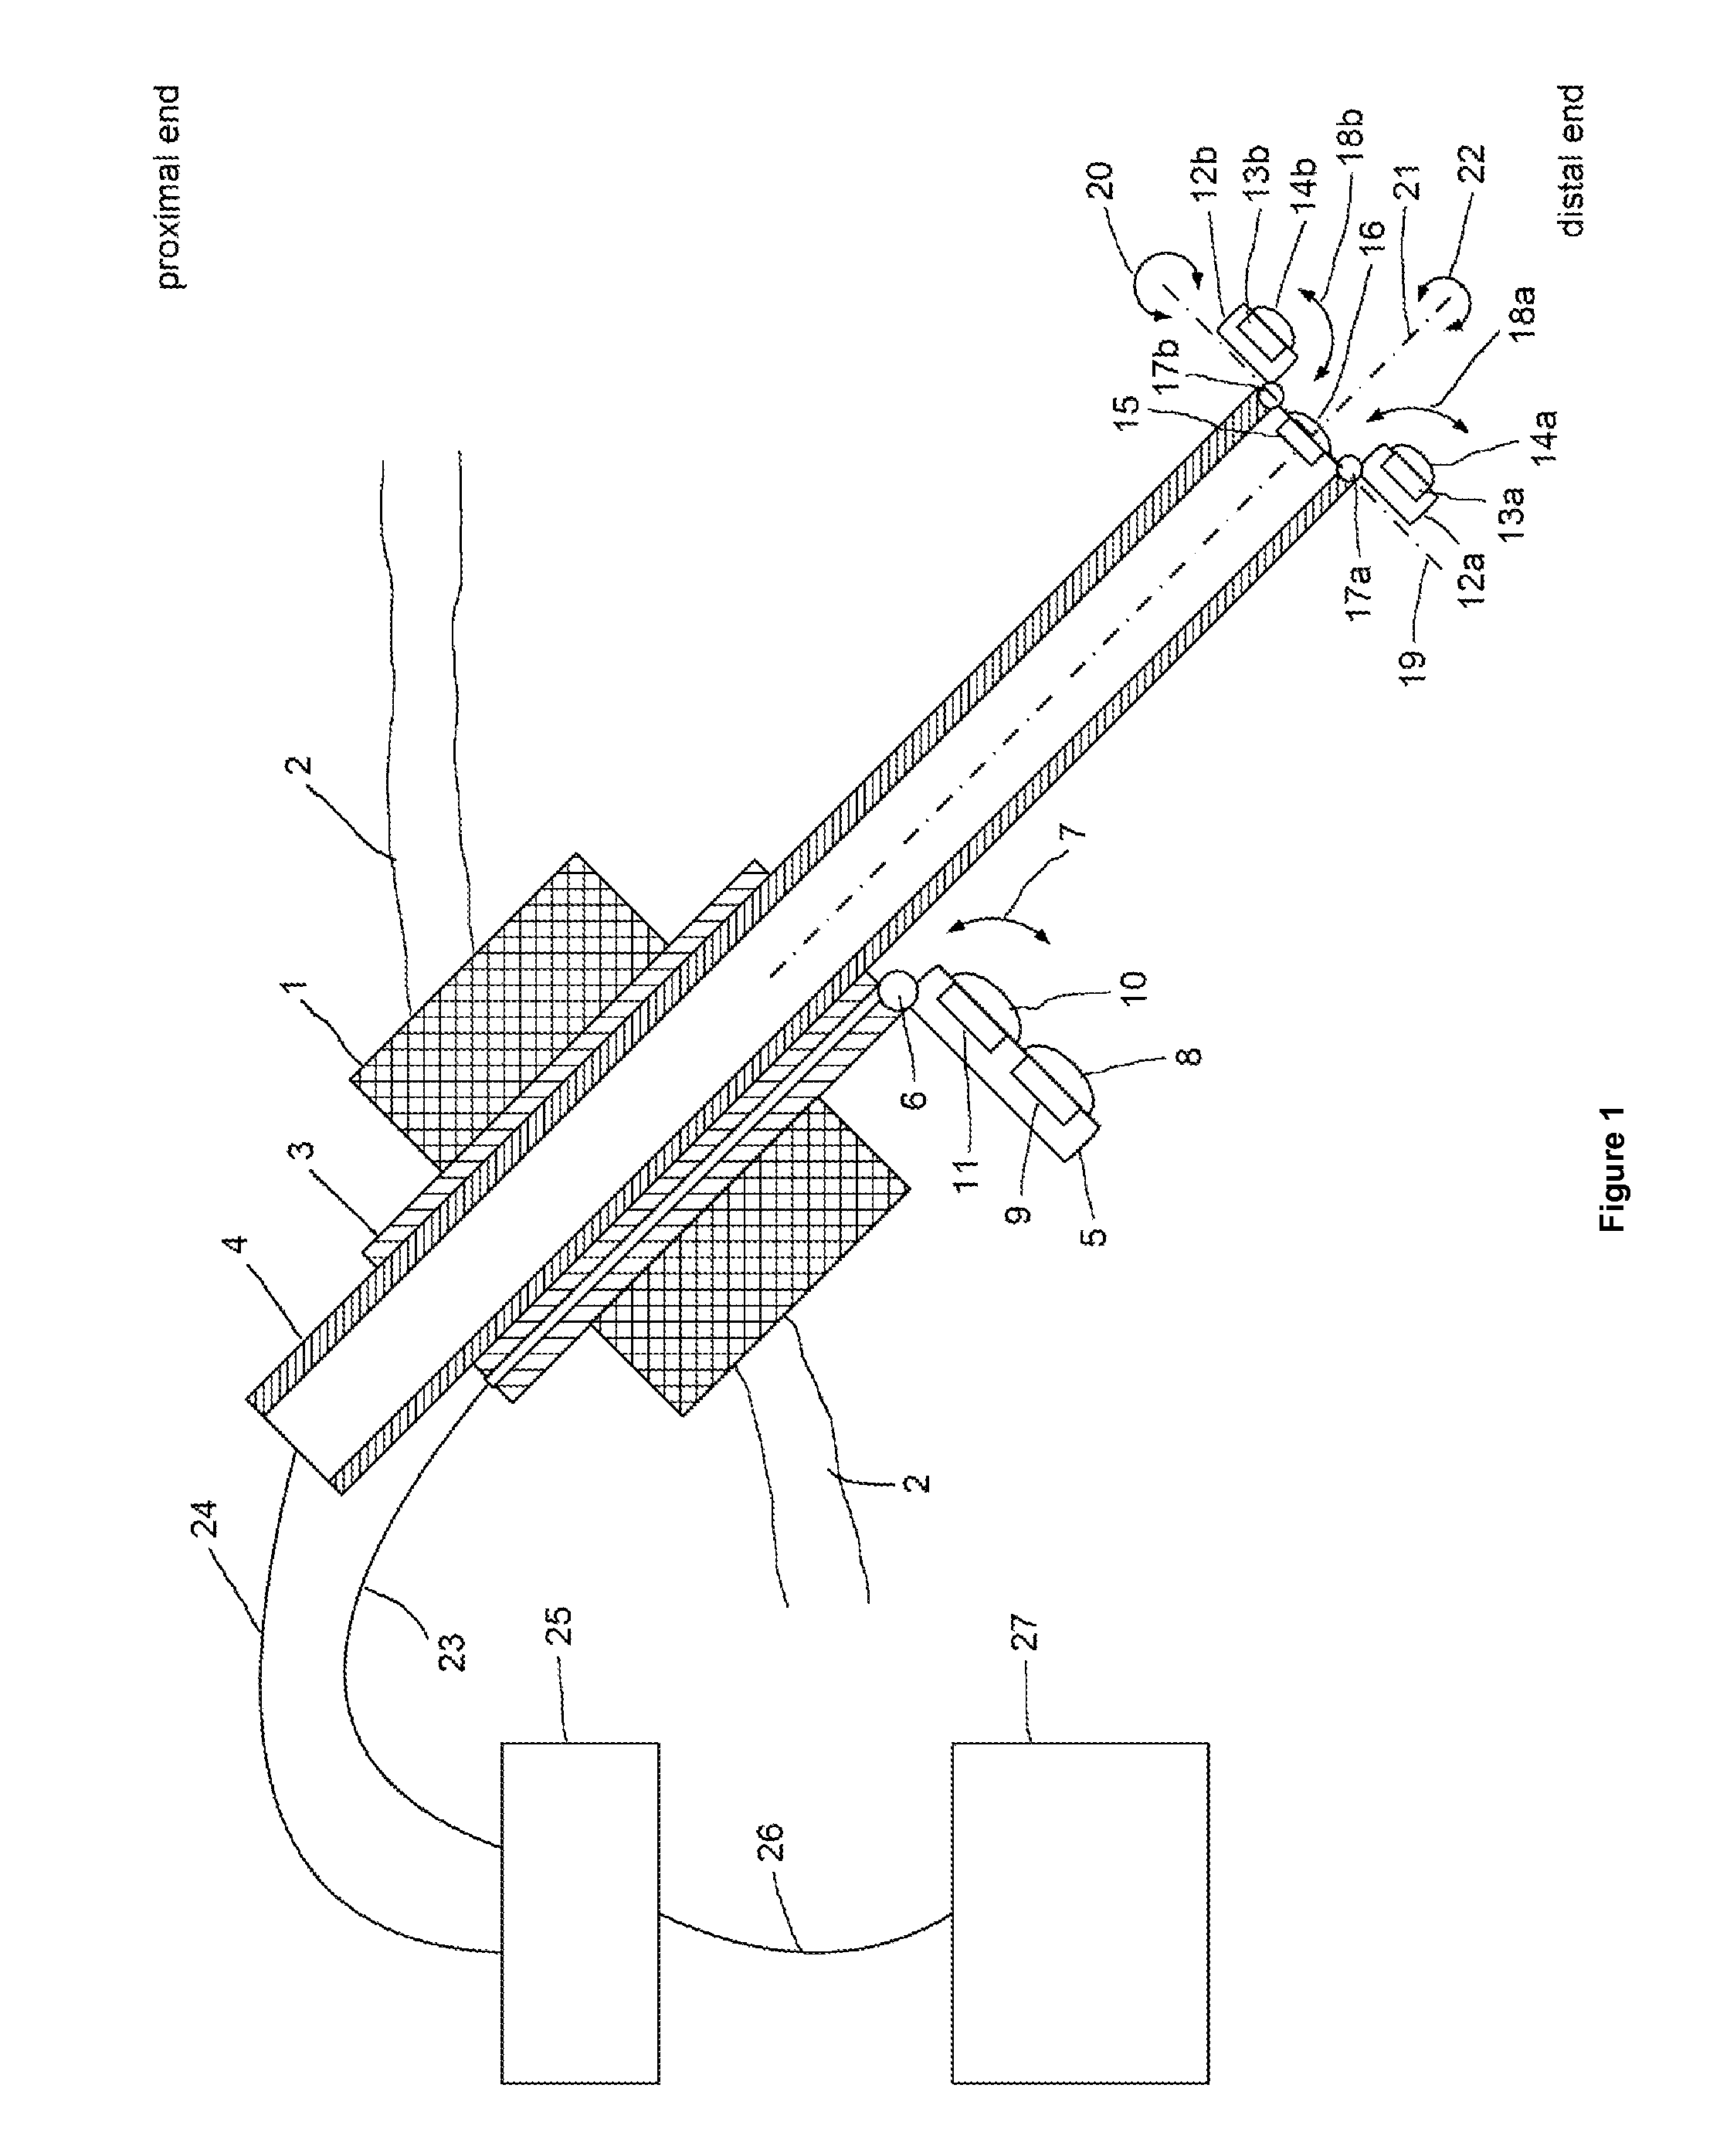 Endoscope comprising a system with multiple cameras for use in minimal-invasive surgery